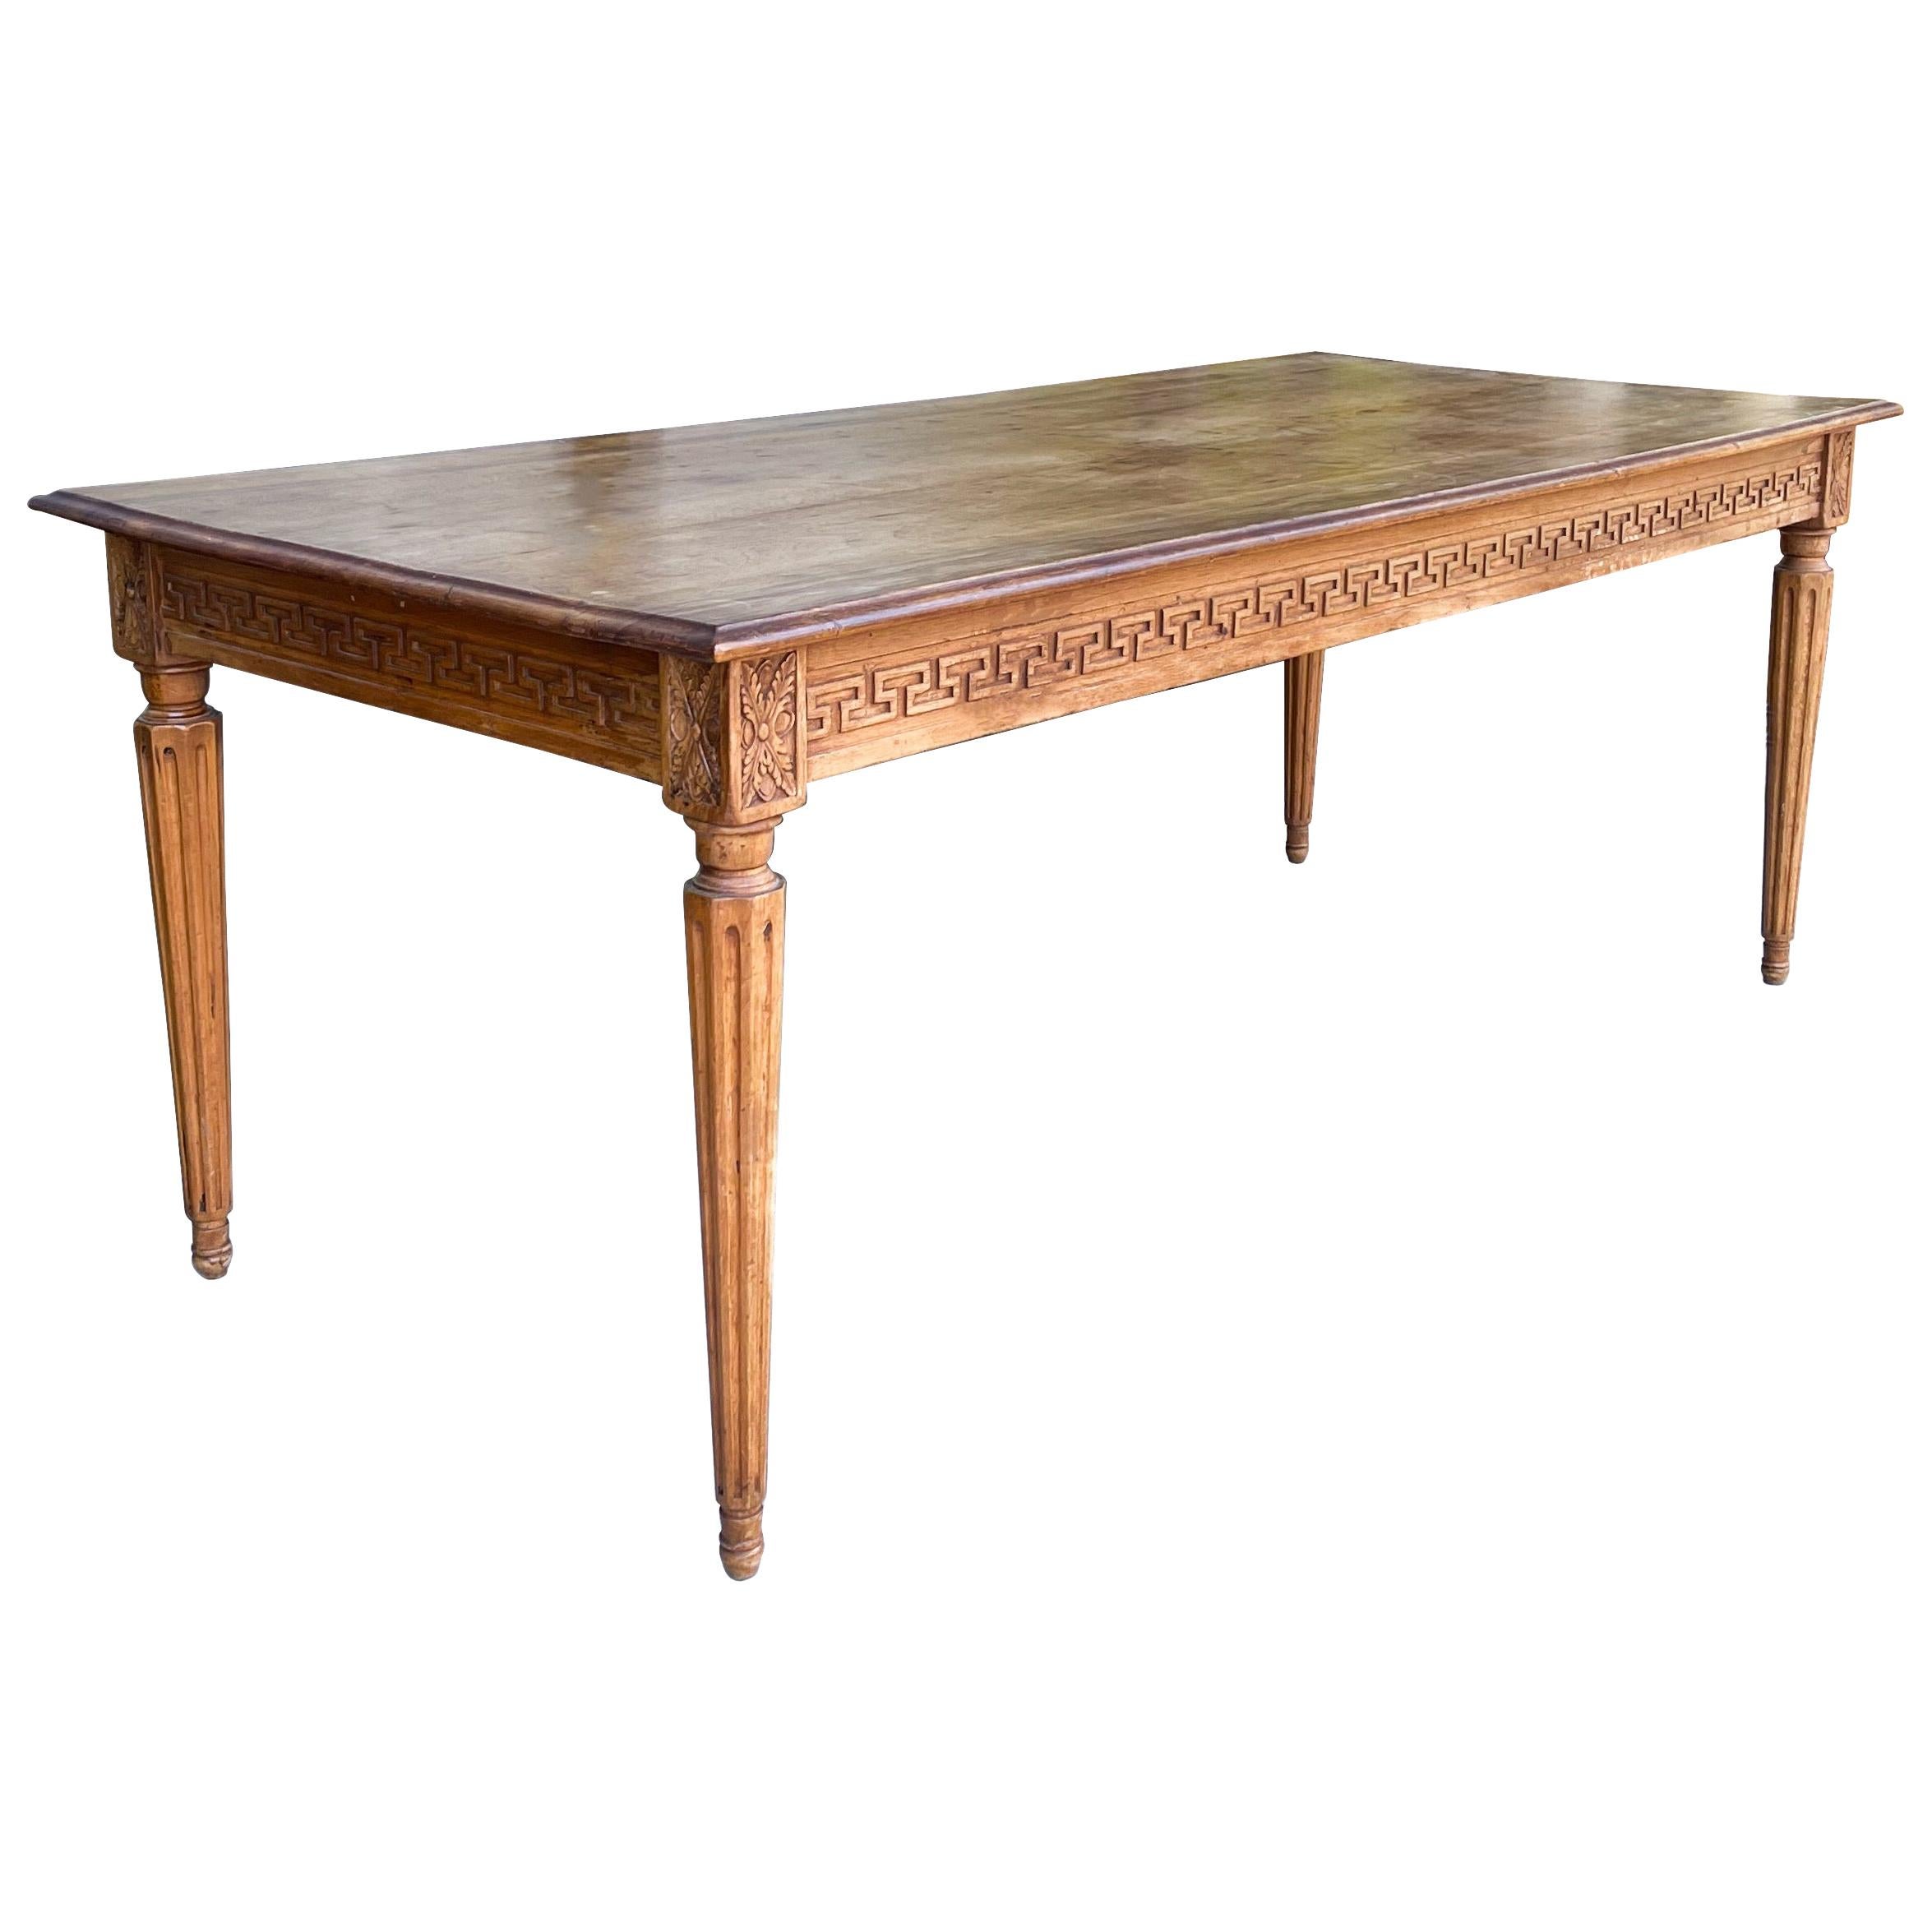 Early 20th Century Neo-Classical Style Italian Carved Walnut Farm Table